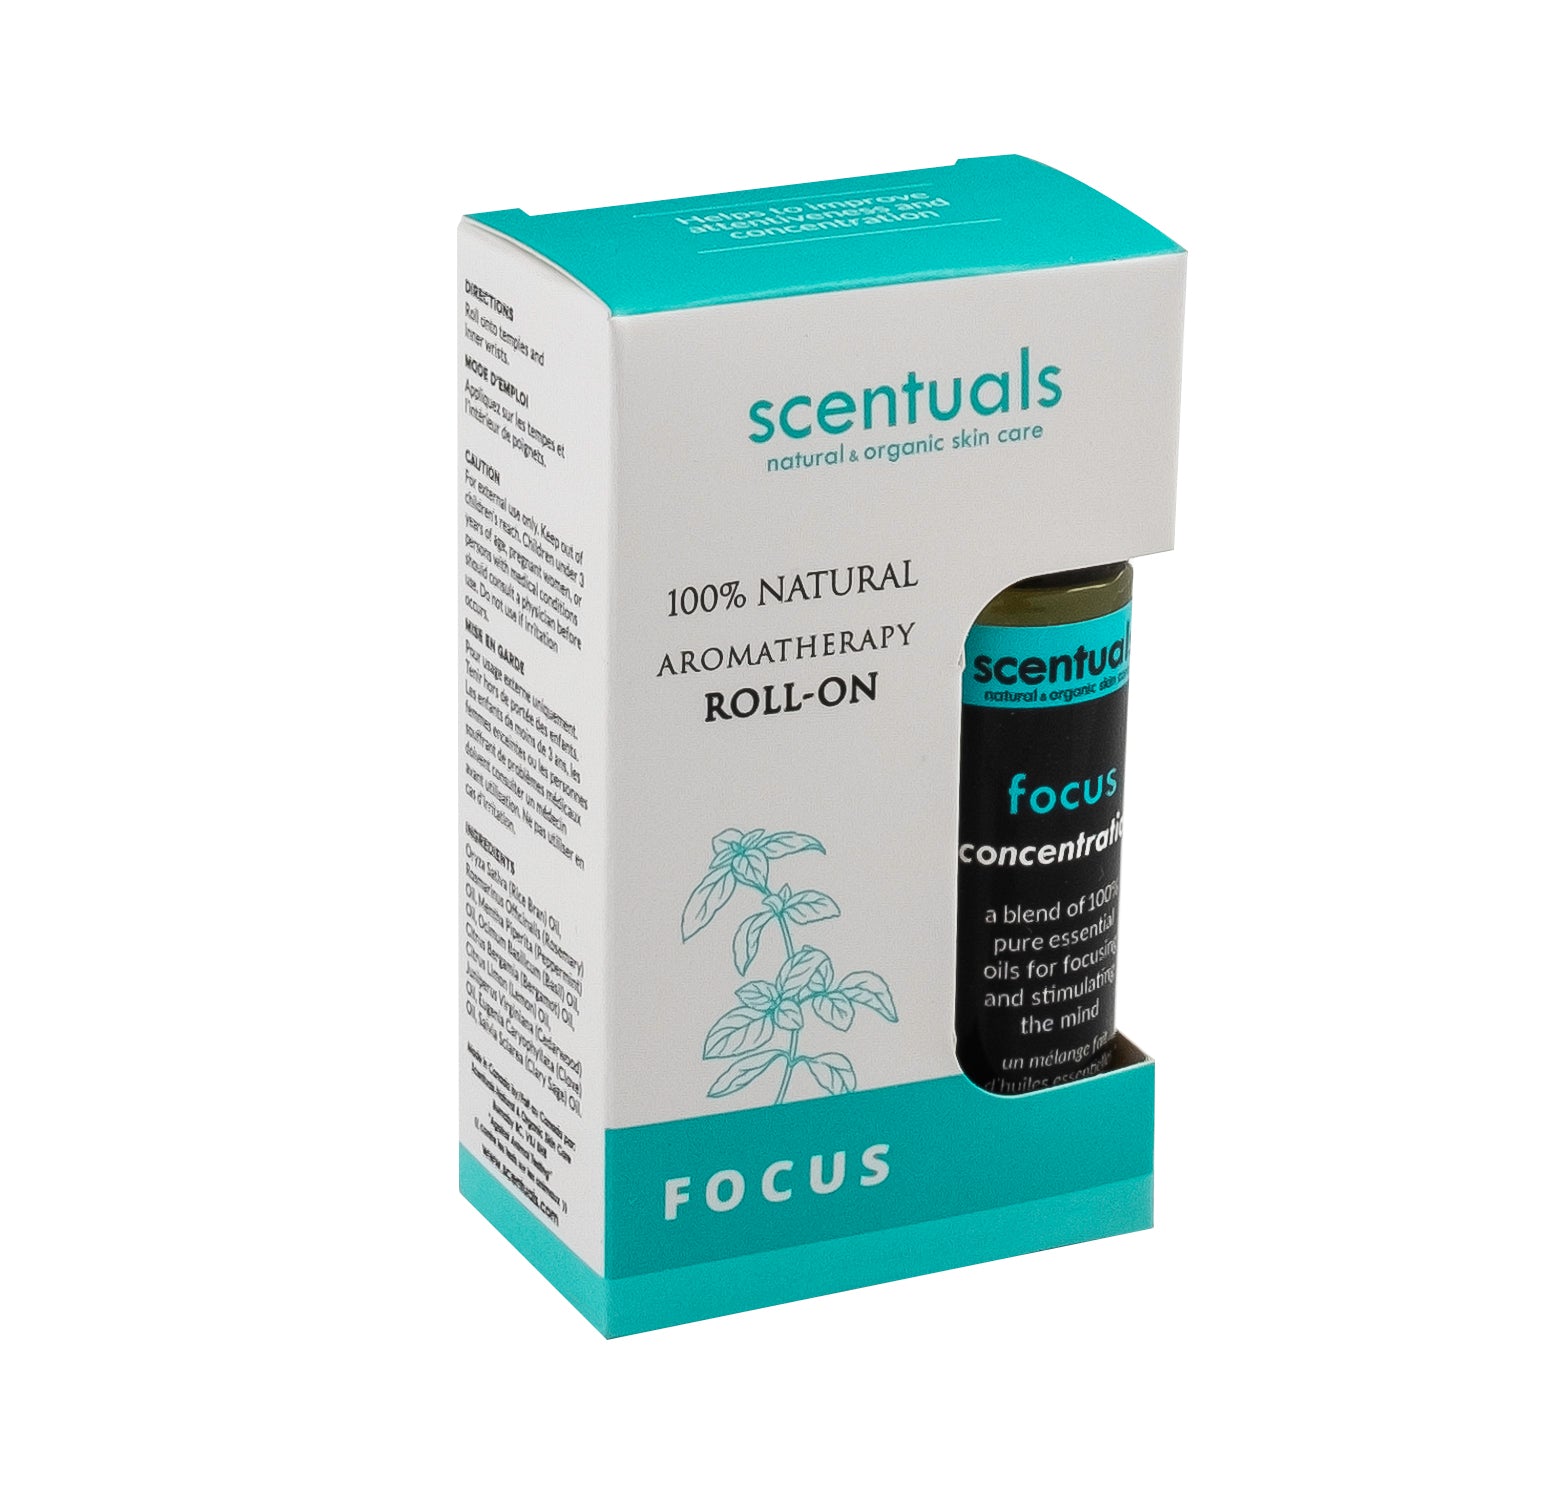 Focus Roll-On (Boxed)